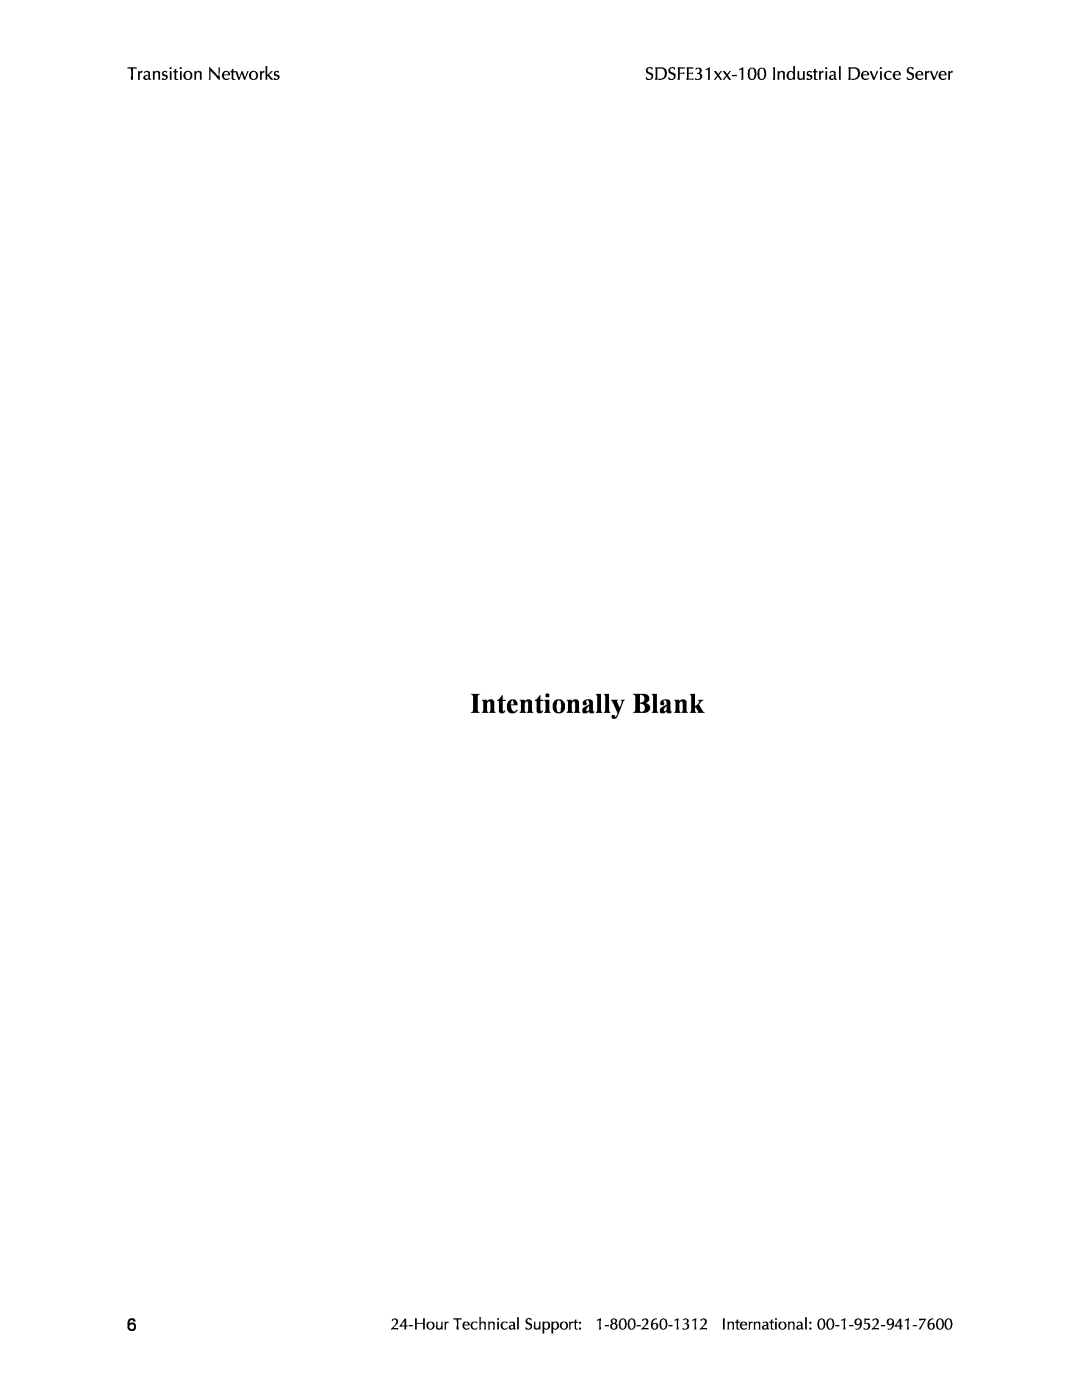 Transition Networks RS-232-TO-100BASE-FX, SDSFE31XX-100 manual Intentionally Blank, Transition Networks 